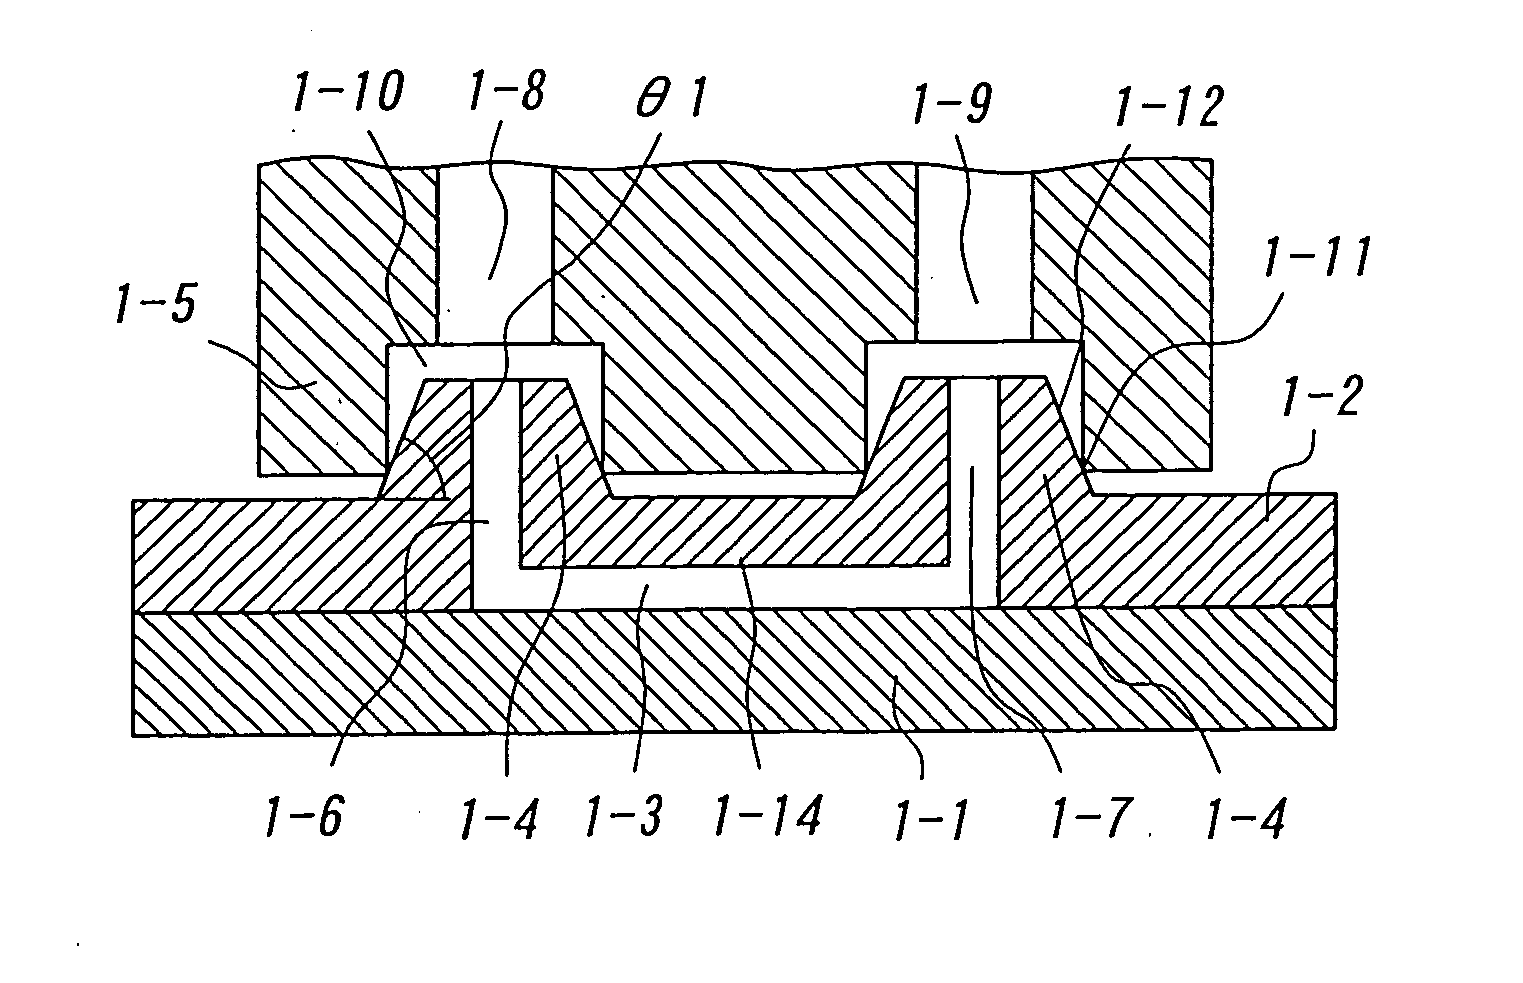 Micro flow passage device, connection device, and method of using the devices